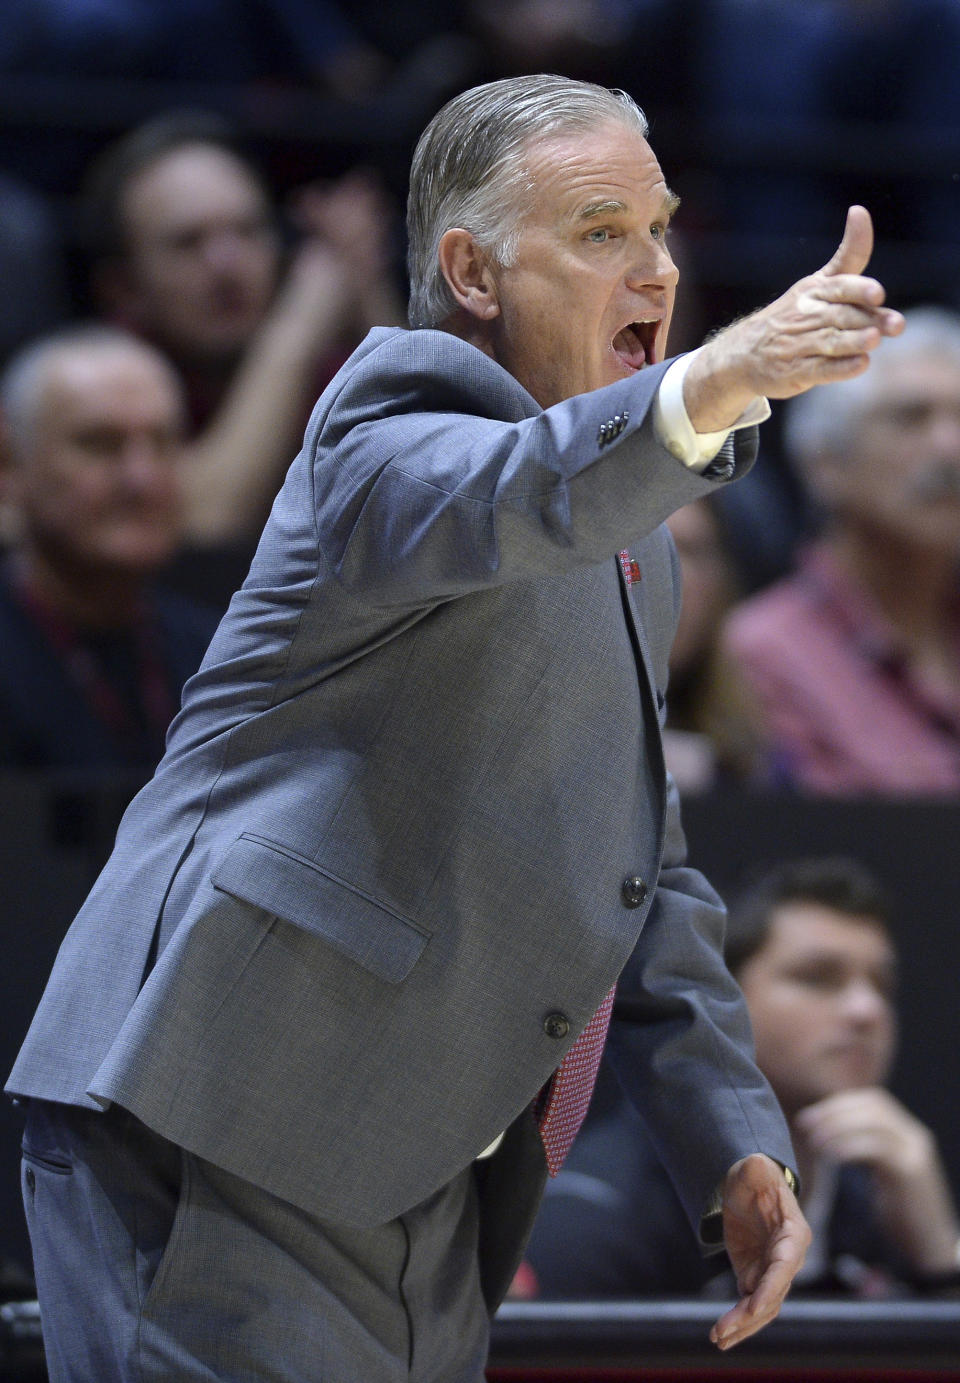 San Diego State coach Brian Dutcher reacts from the bench during the second half of an NCAA college basketball game against Fresno State Wednesday, Jan. 1, 2020, in San Diego. San Diego won 61-52. (AP Photo/Orlando Ramirez)